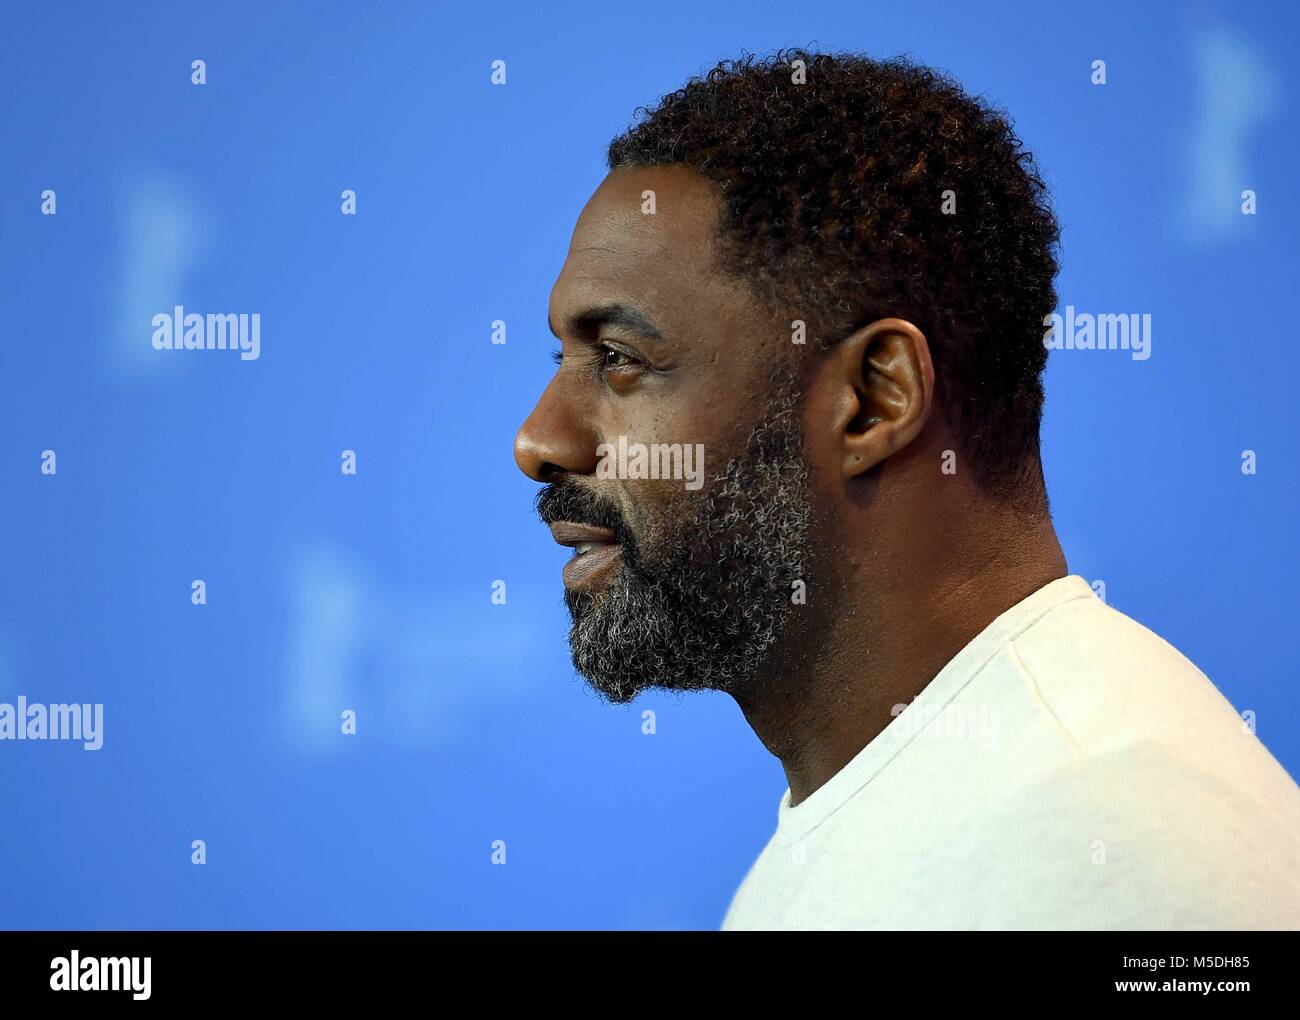 22 February 2018, Germany, Berlin, Photocall: Director Idris Elba. The film is screened with in the category 'Panorama' at the Berlin International Film Festival. Photo: Britta Pedersen/dpa Stock Photo